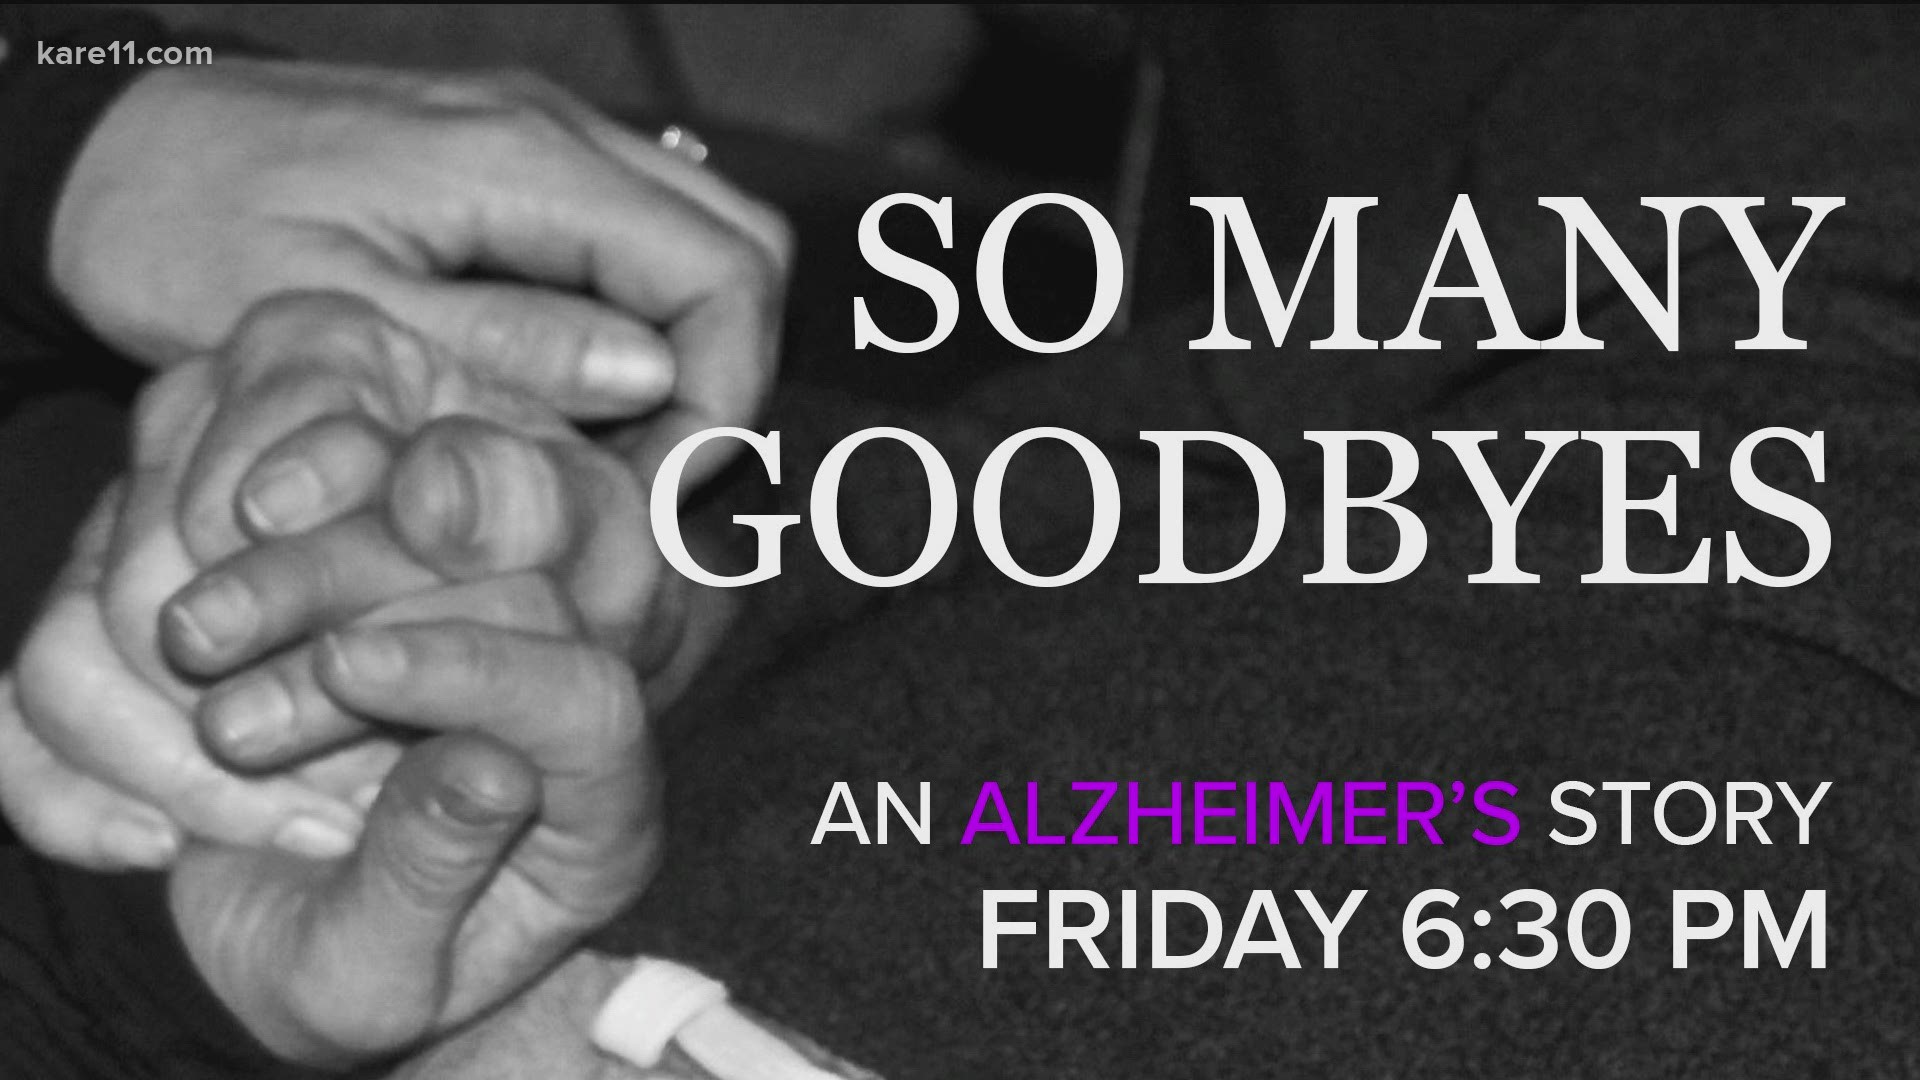 Friday, Sept. 25, at 6:30 p.m., Karla will share her family’s journey – one millions of families also know – on the KARE 11 special “So Many Goodbyes: An Alzheimer’s